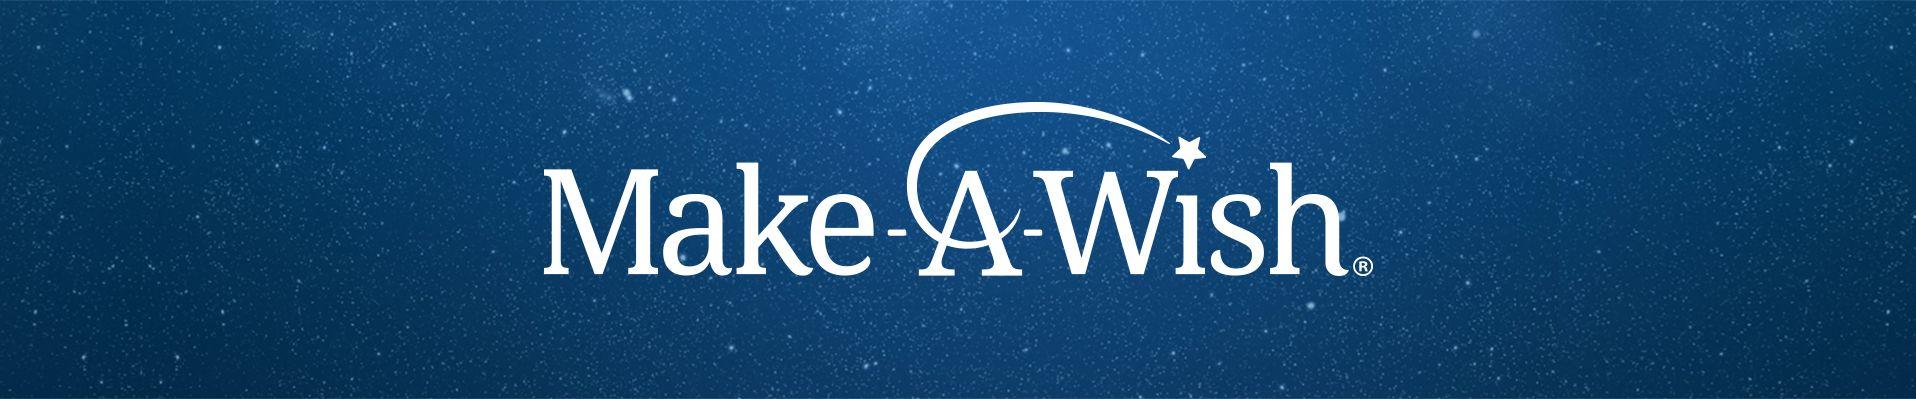 Make a Wish Logo - Eat A Dish For Make A Wish® 2018. Maggiano's Little Italy